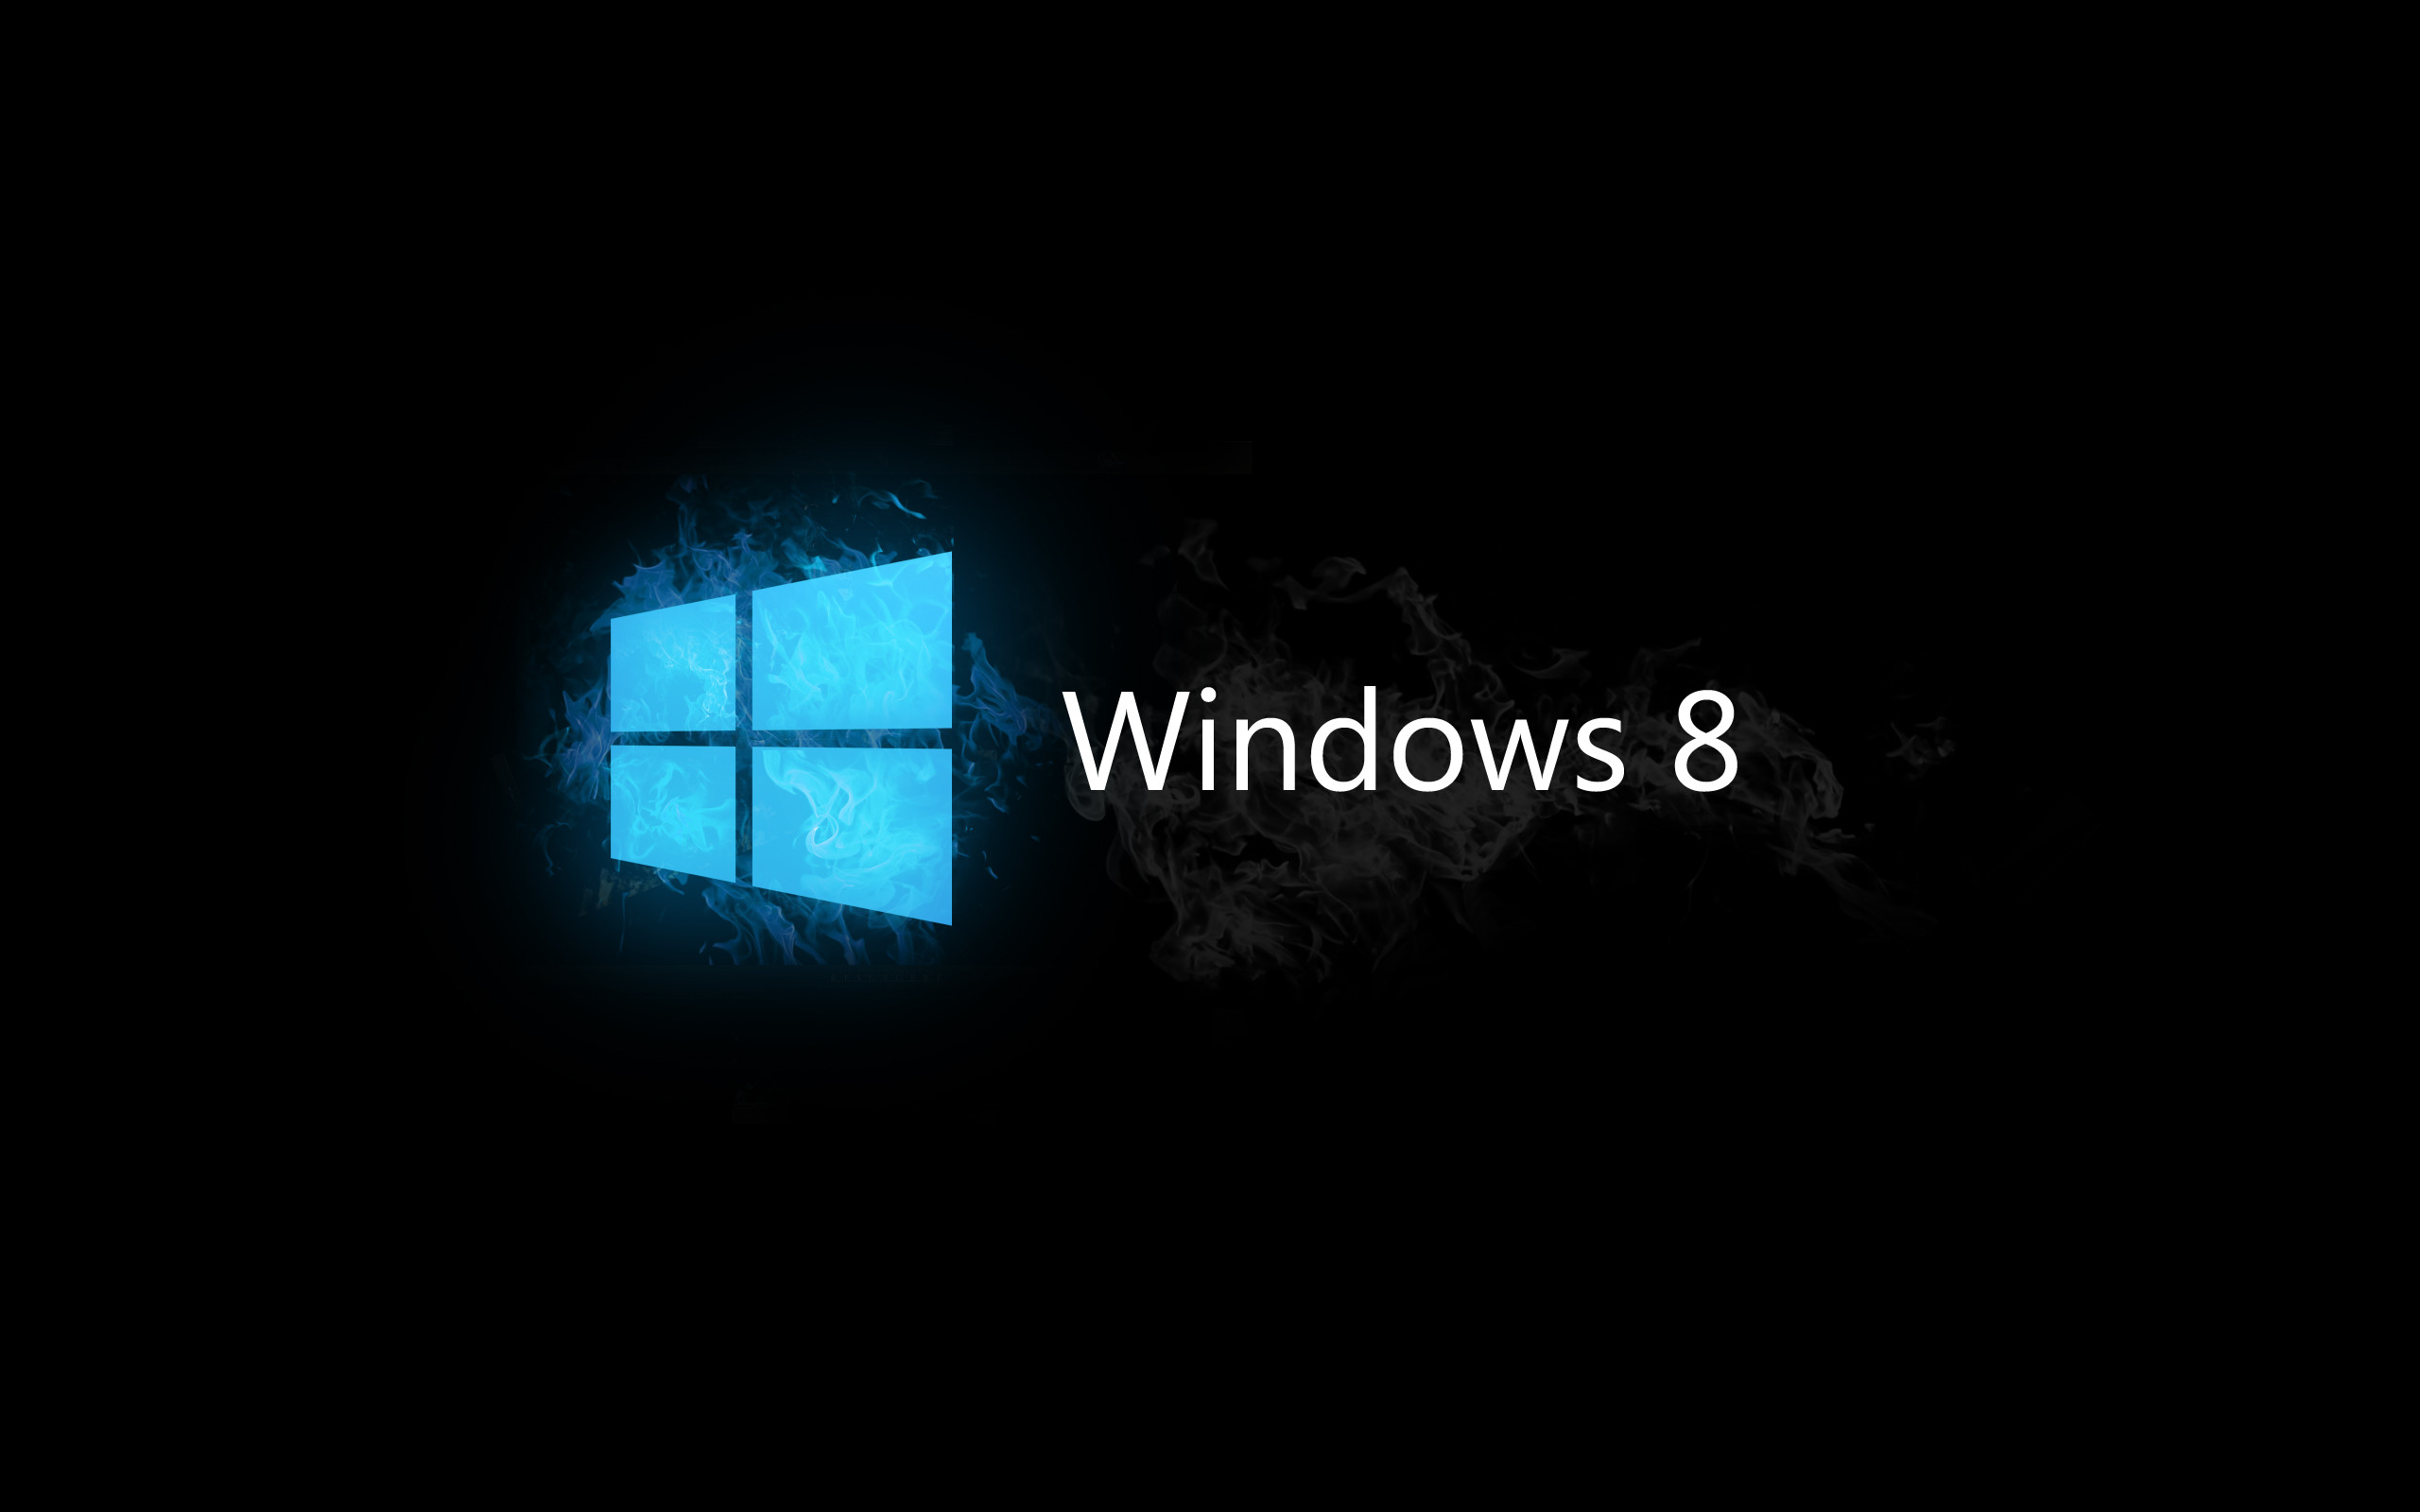 2560x1600 Releted Windows 8 Wallpapers: